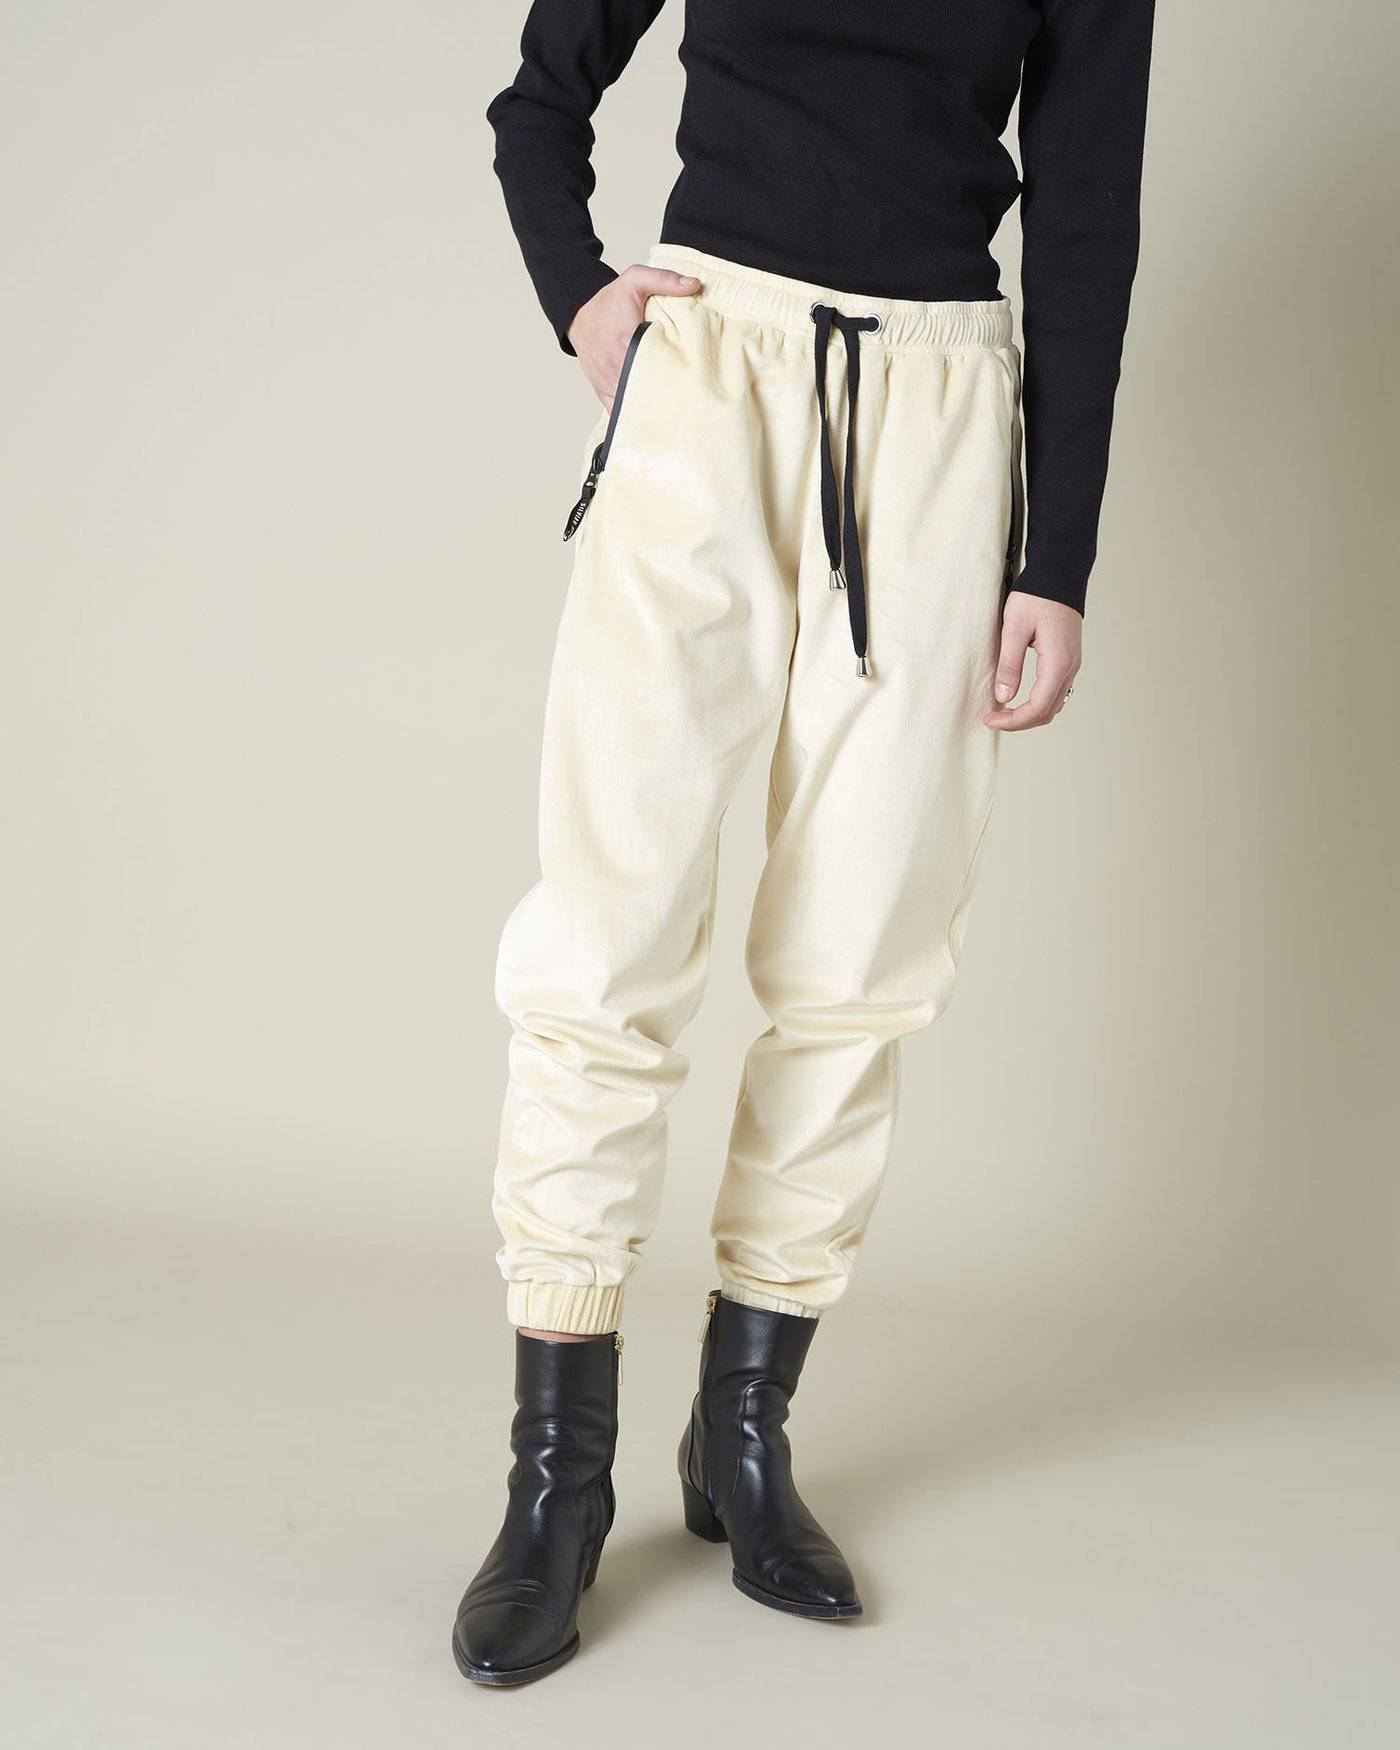 SPORT TROUSERS WITH CONTRASTING COLOR LACES SILVIAN HEACH - Bayolo Concept Store